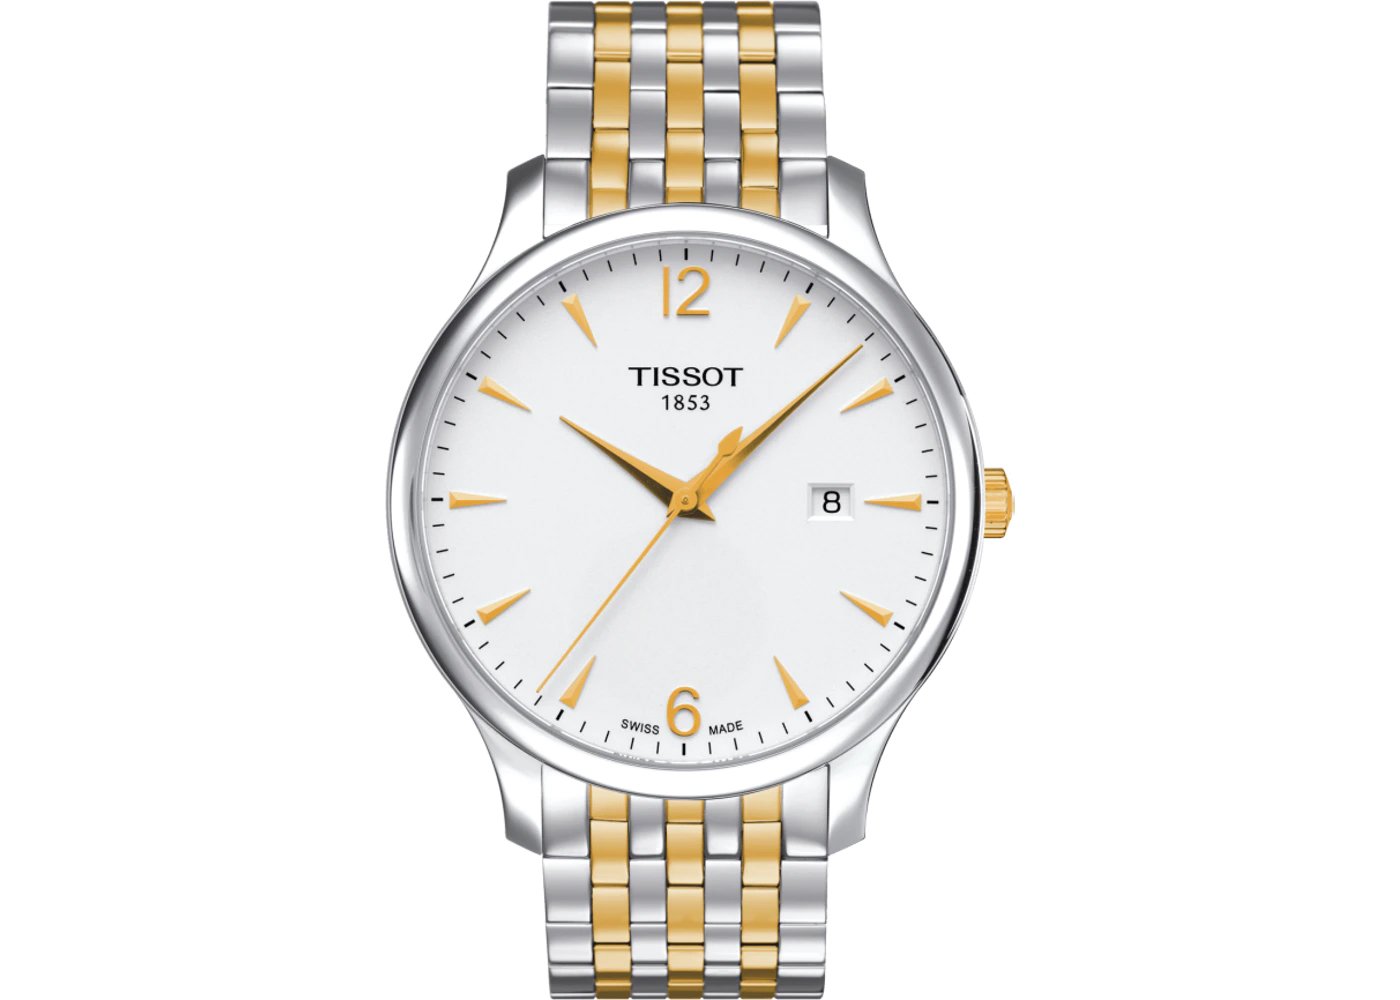 Tissot Swiss Made T-Classic Tradition 2 Tone Gold Plated Men's Watch T0636102203700 - Prestige